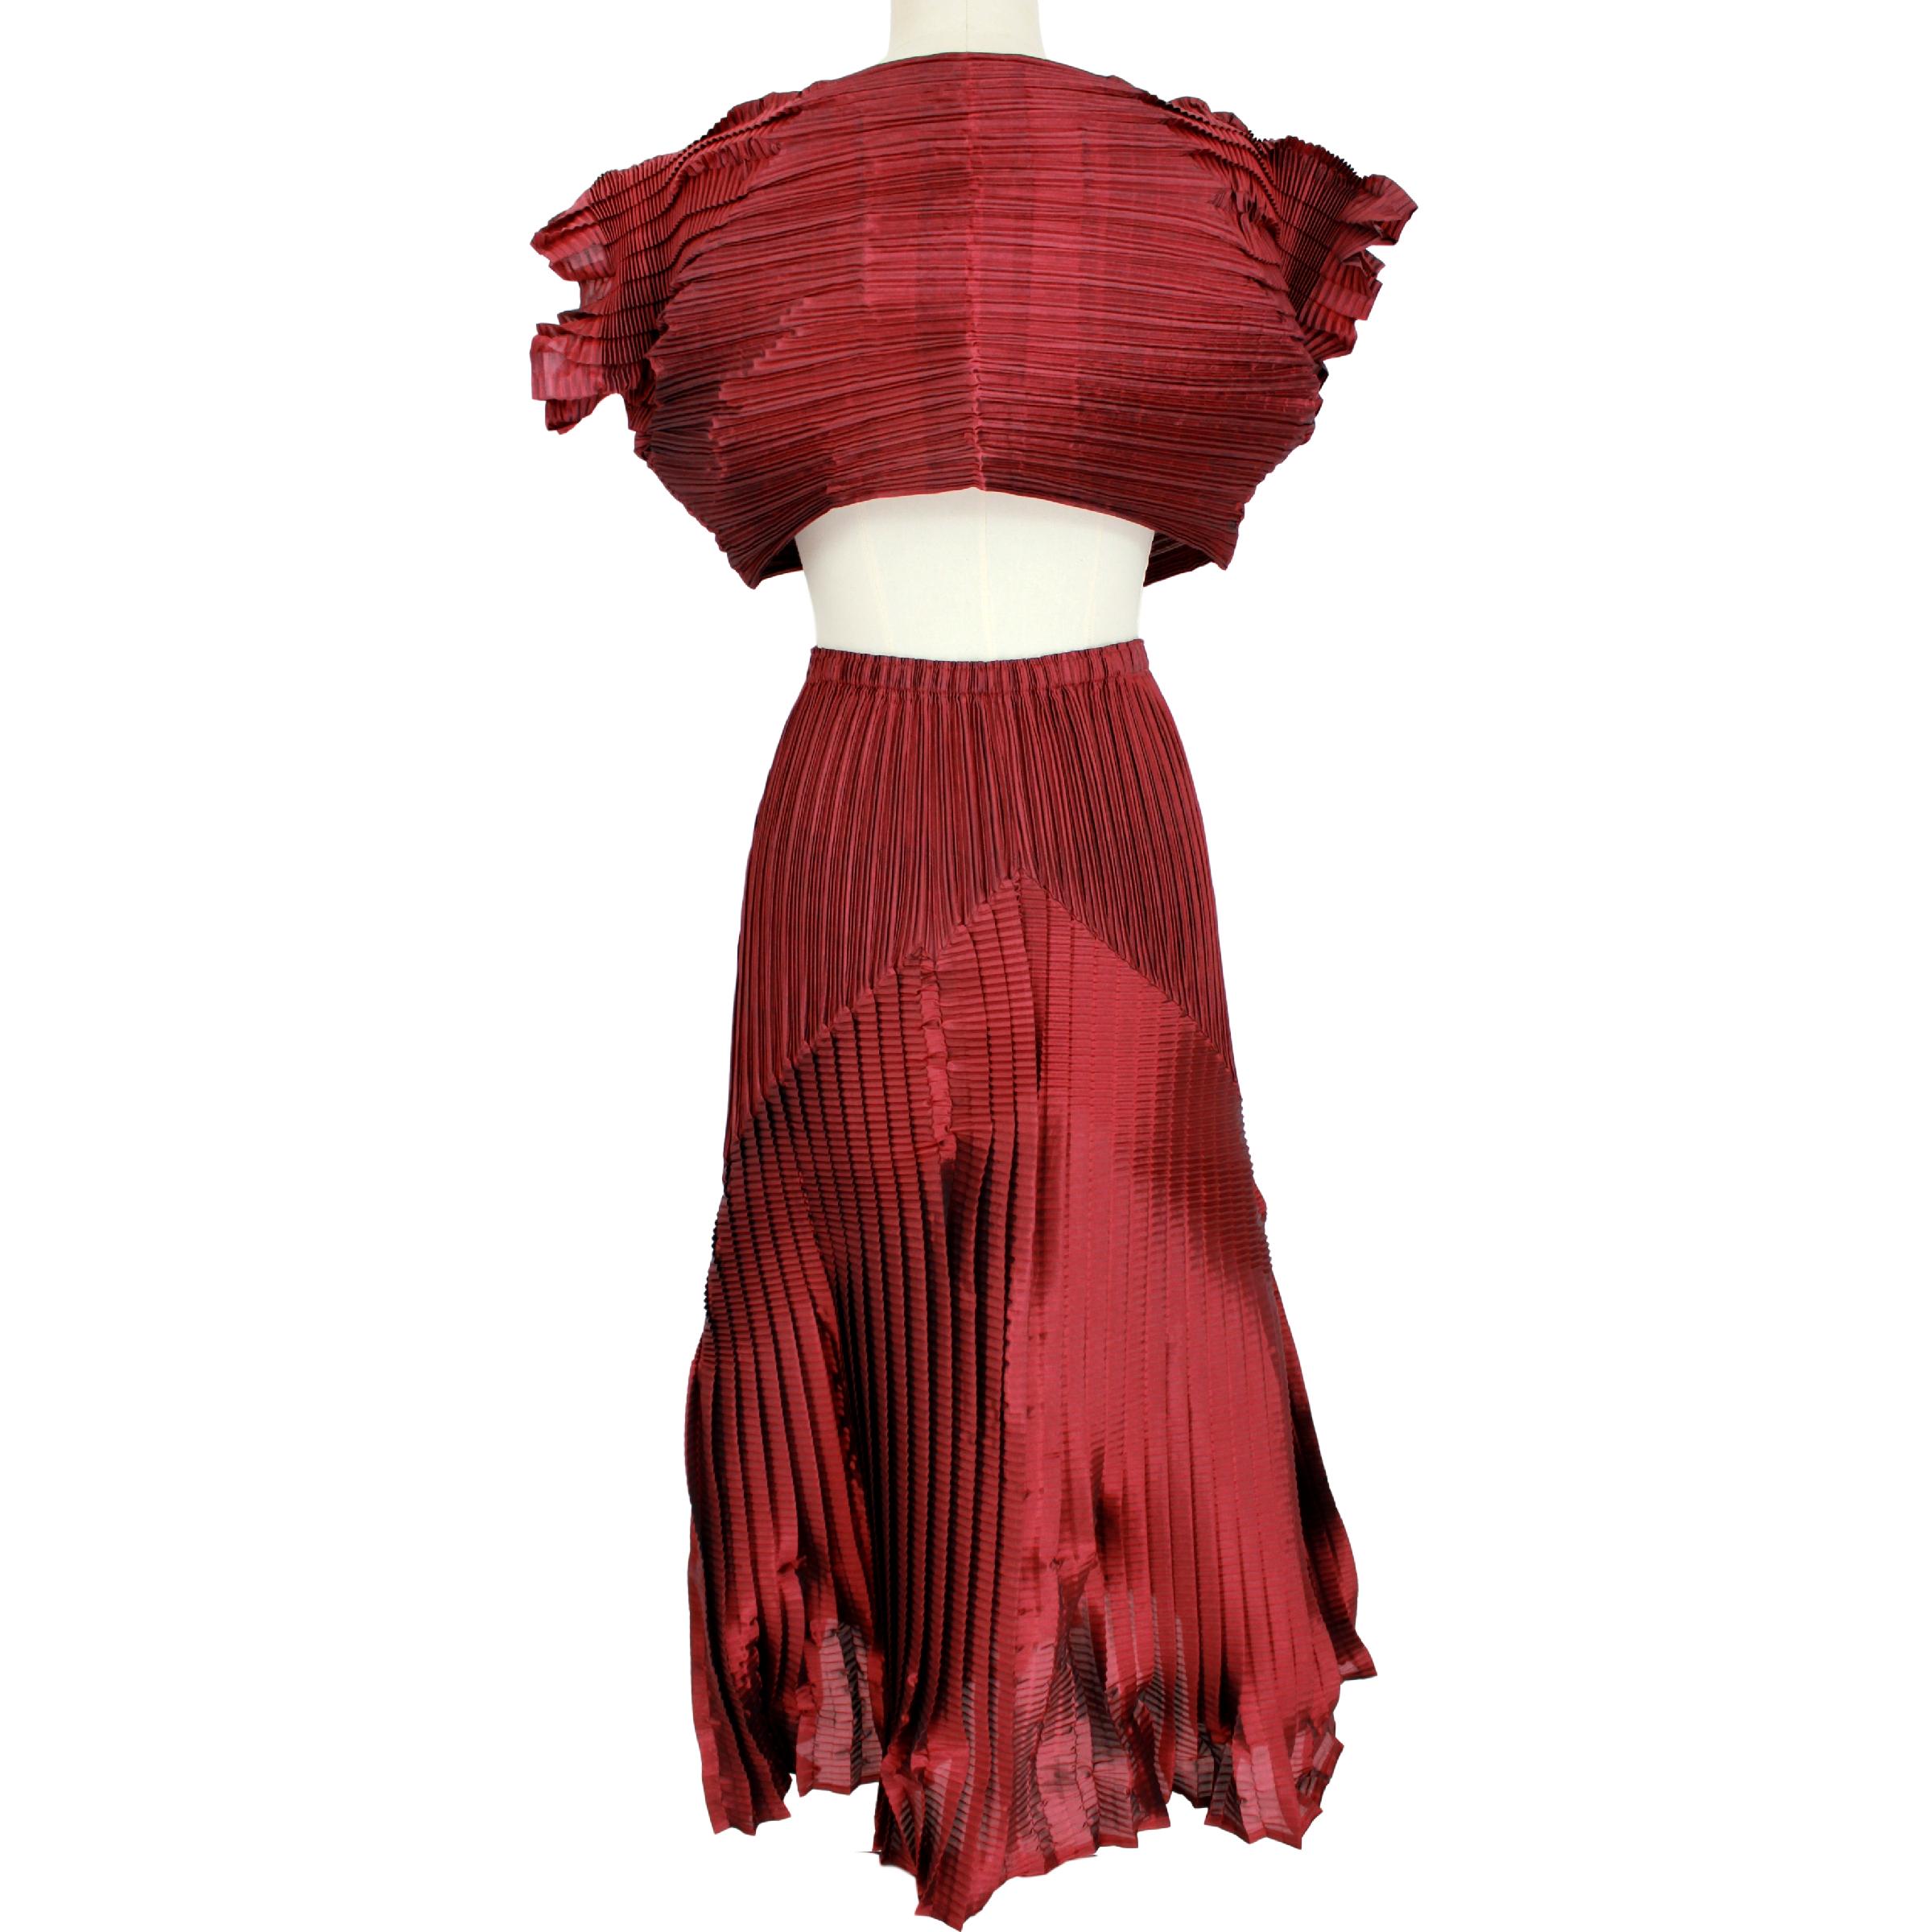 Issey Miyake Fete women's vintage skirt suit. Double long veil skirt and satin pleated bolero. High waist skirt with elastic. Red Purple, 100% polyester. 1990s. Made in Japan. Like new excellent vintage condition.

Size: XS /S It 4 US 6 UK 2